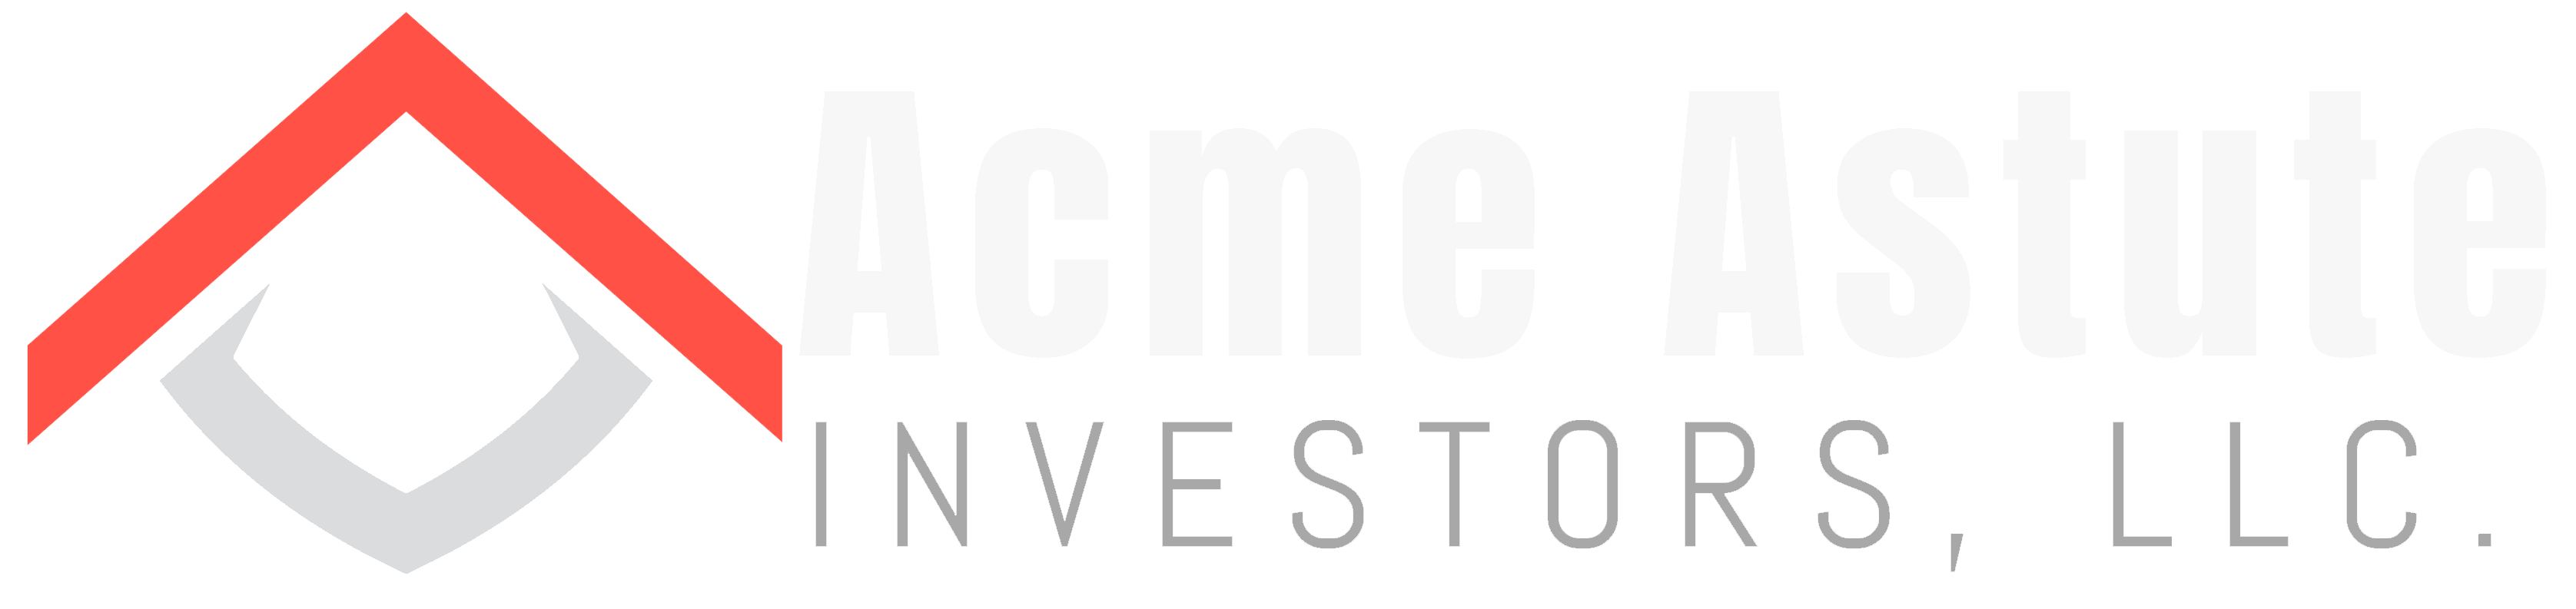 Acme Astute Investors LLCOur Projects